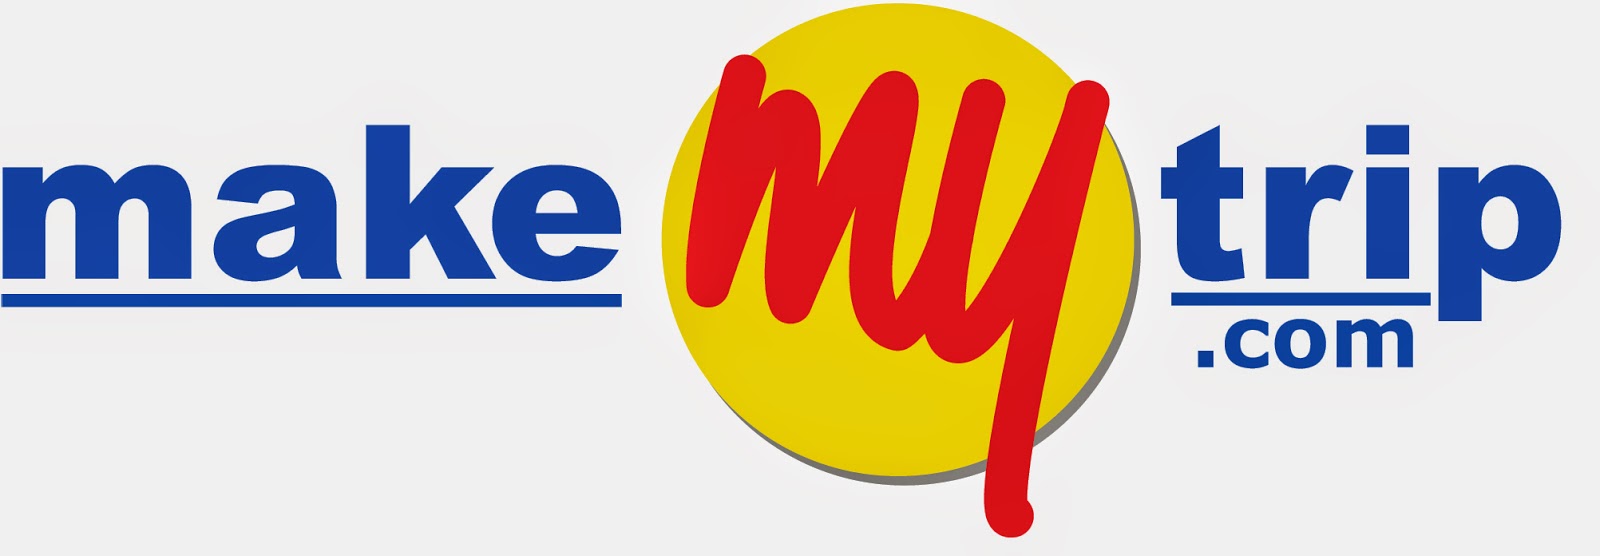 One Of The Largest Travel Groups In India as MakeMyTrip Will Acquire Ibibo